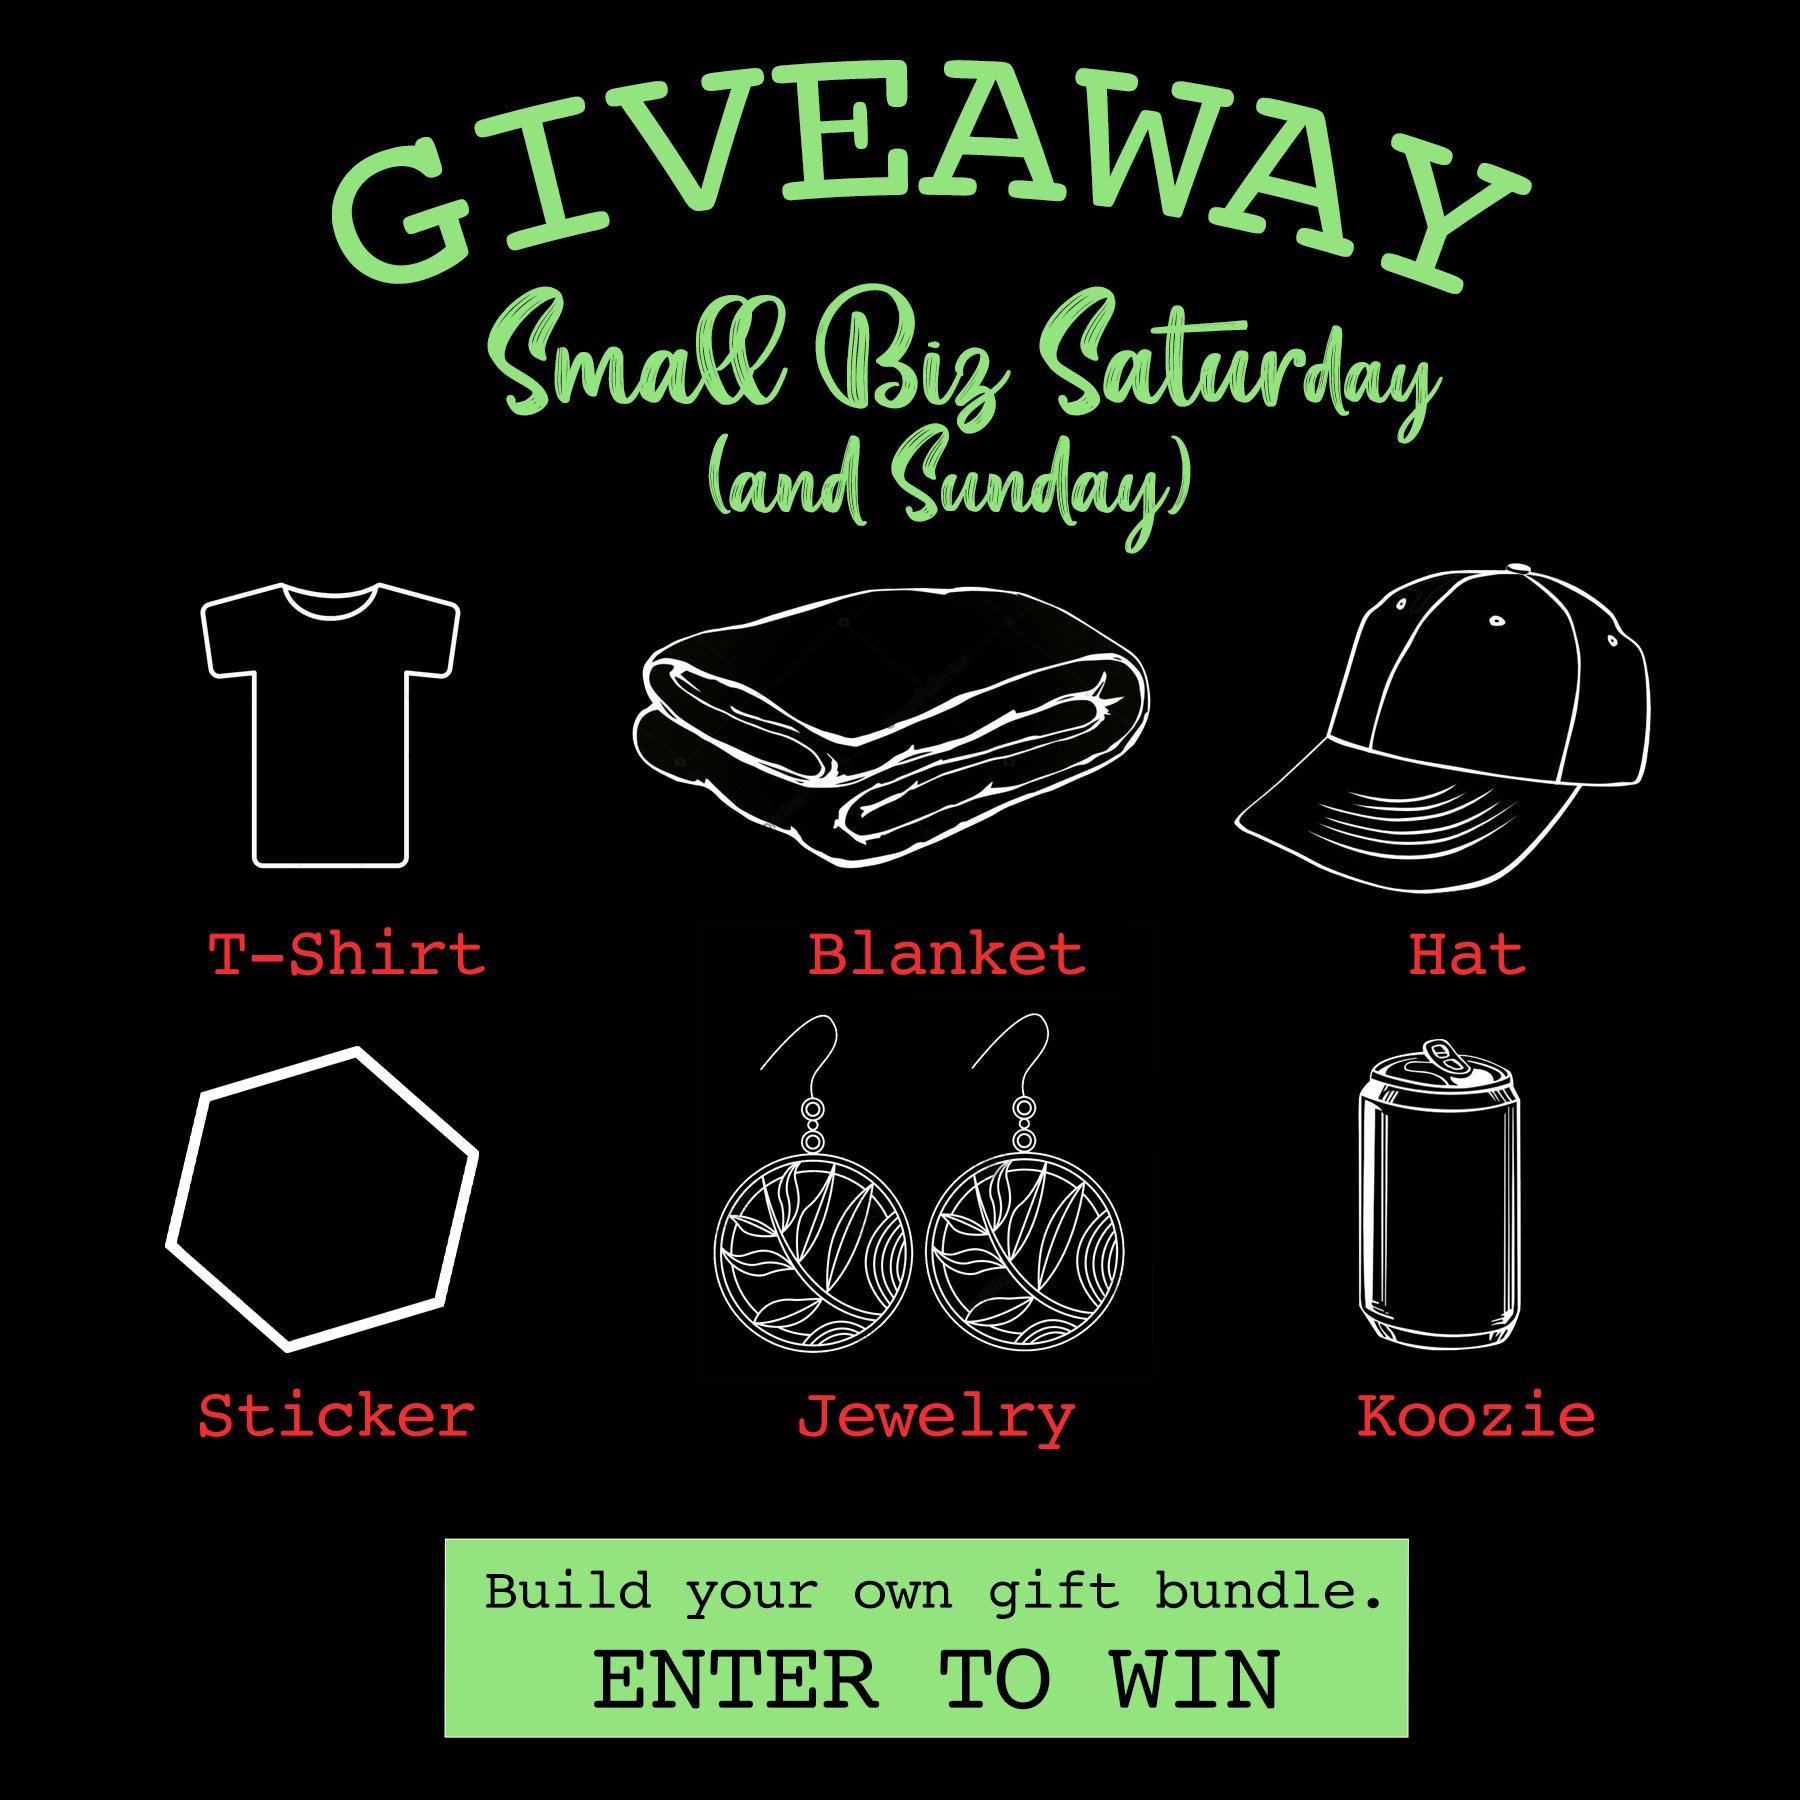 2021 Small Business Saturday (& Sunday) GIVEAWAY